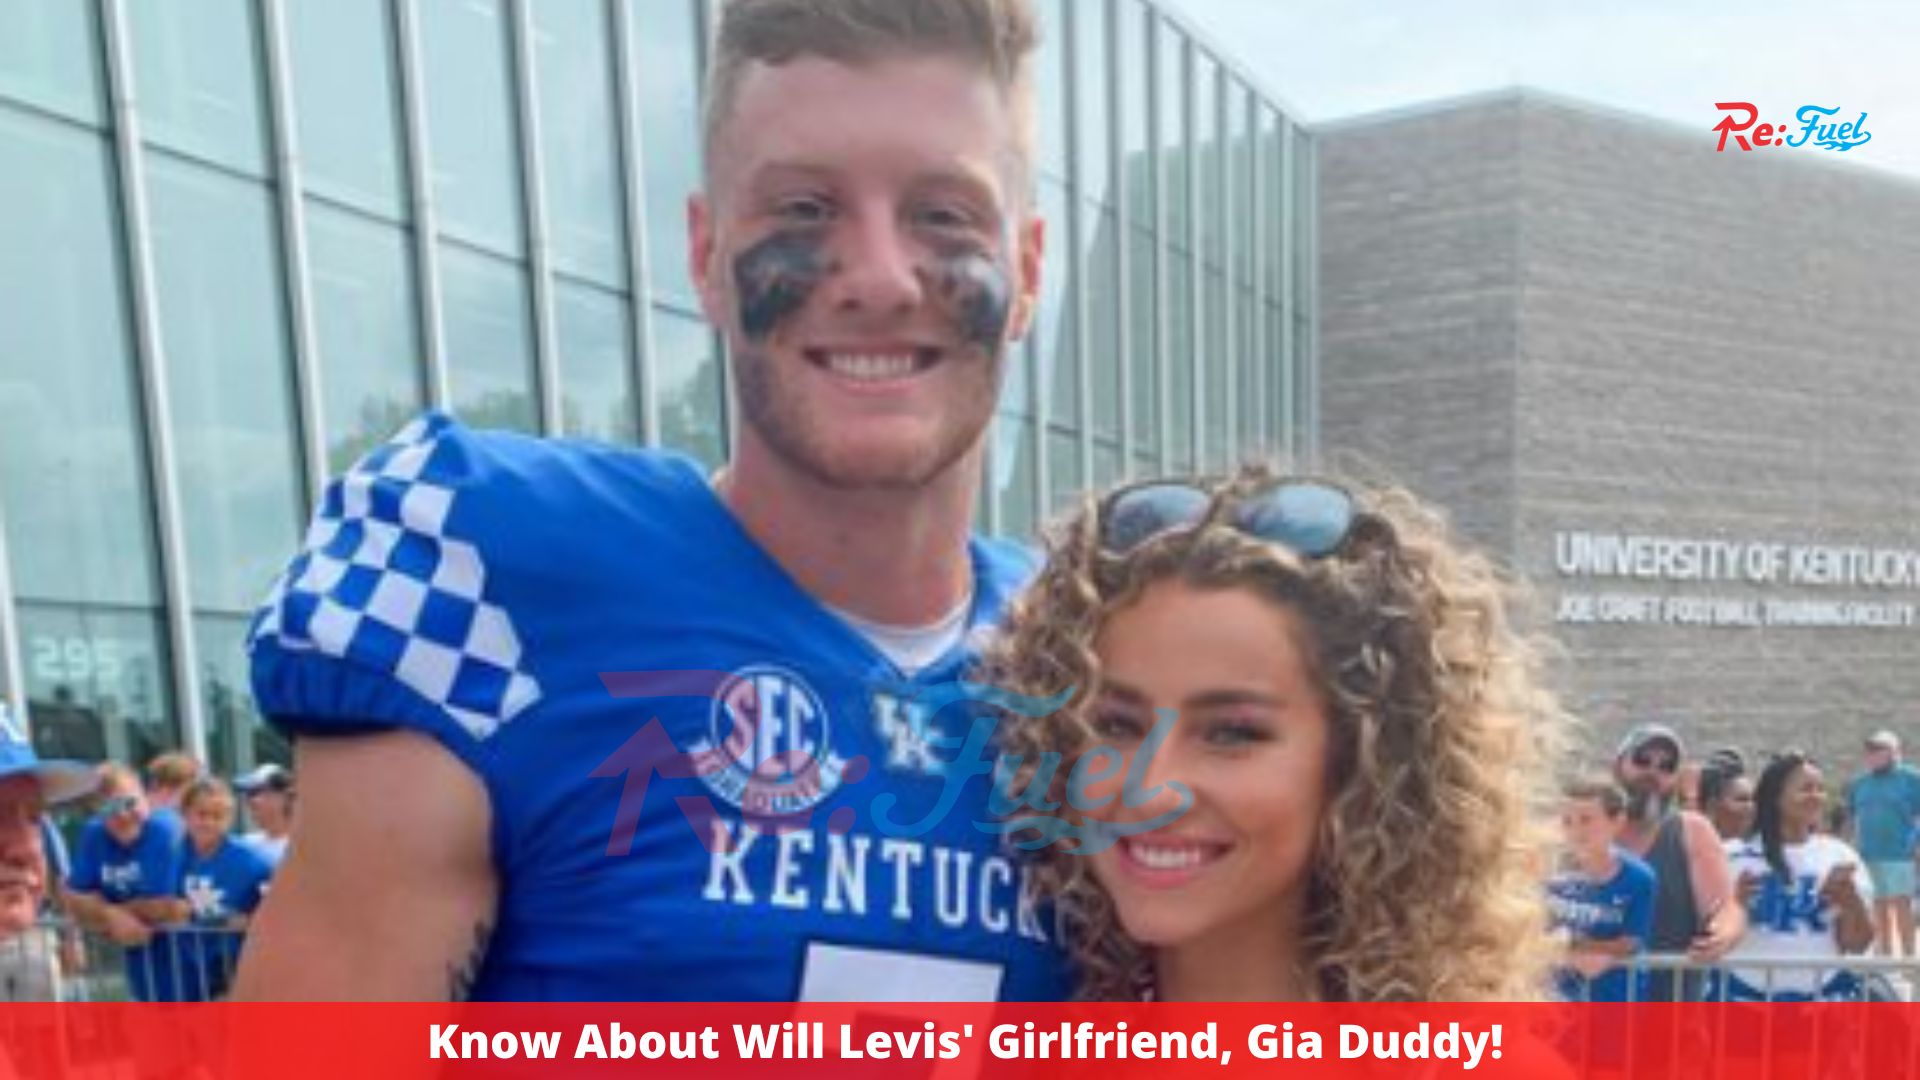 Know About Will Levis' Girlfriend, Gia Duddy!